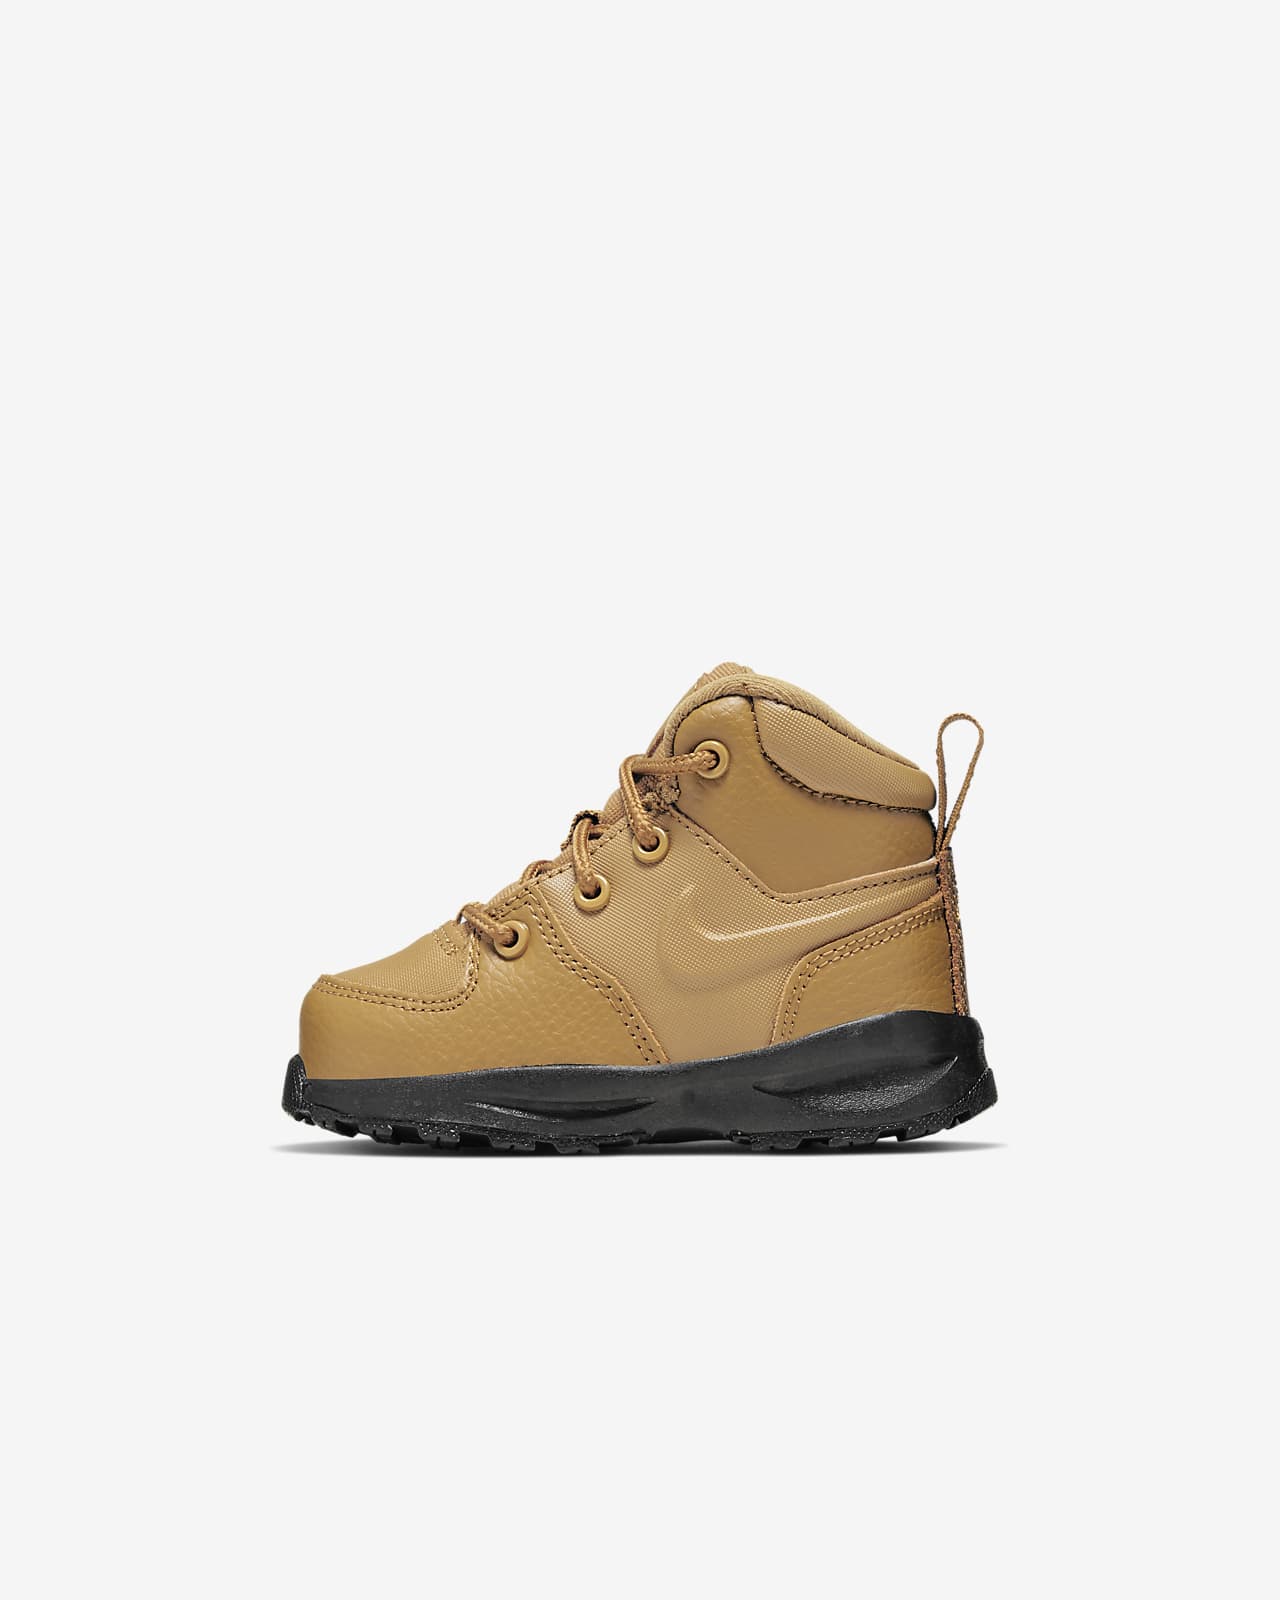 Nike Manoa Baby and Toddler Boot. Nike NL